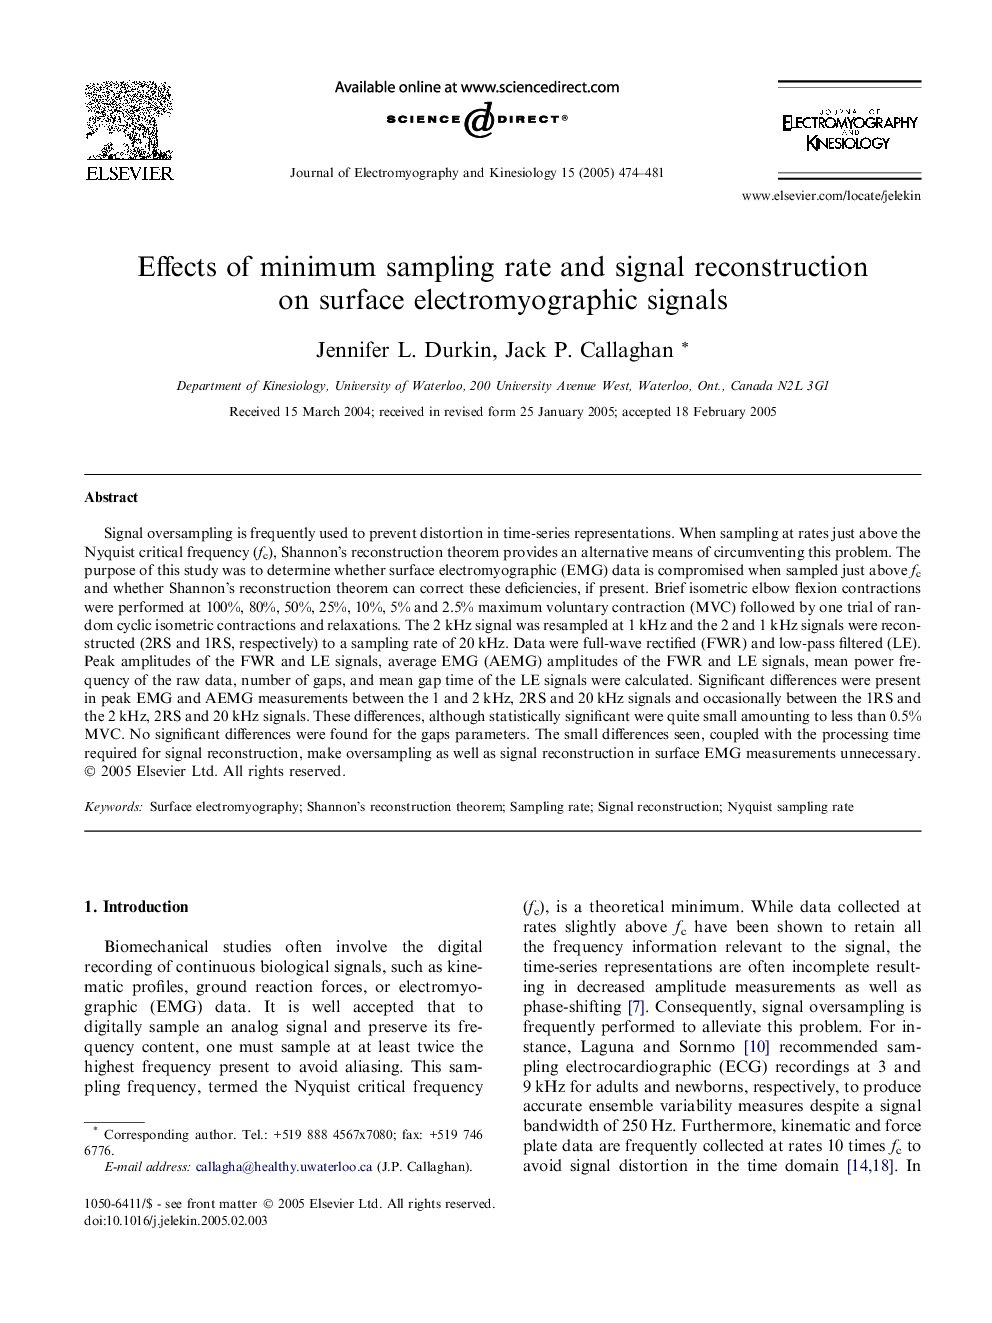 Effects of minimum sampling rate and signal reconstruction on surface electromyographic signals